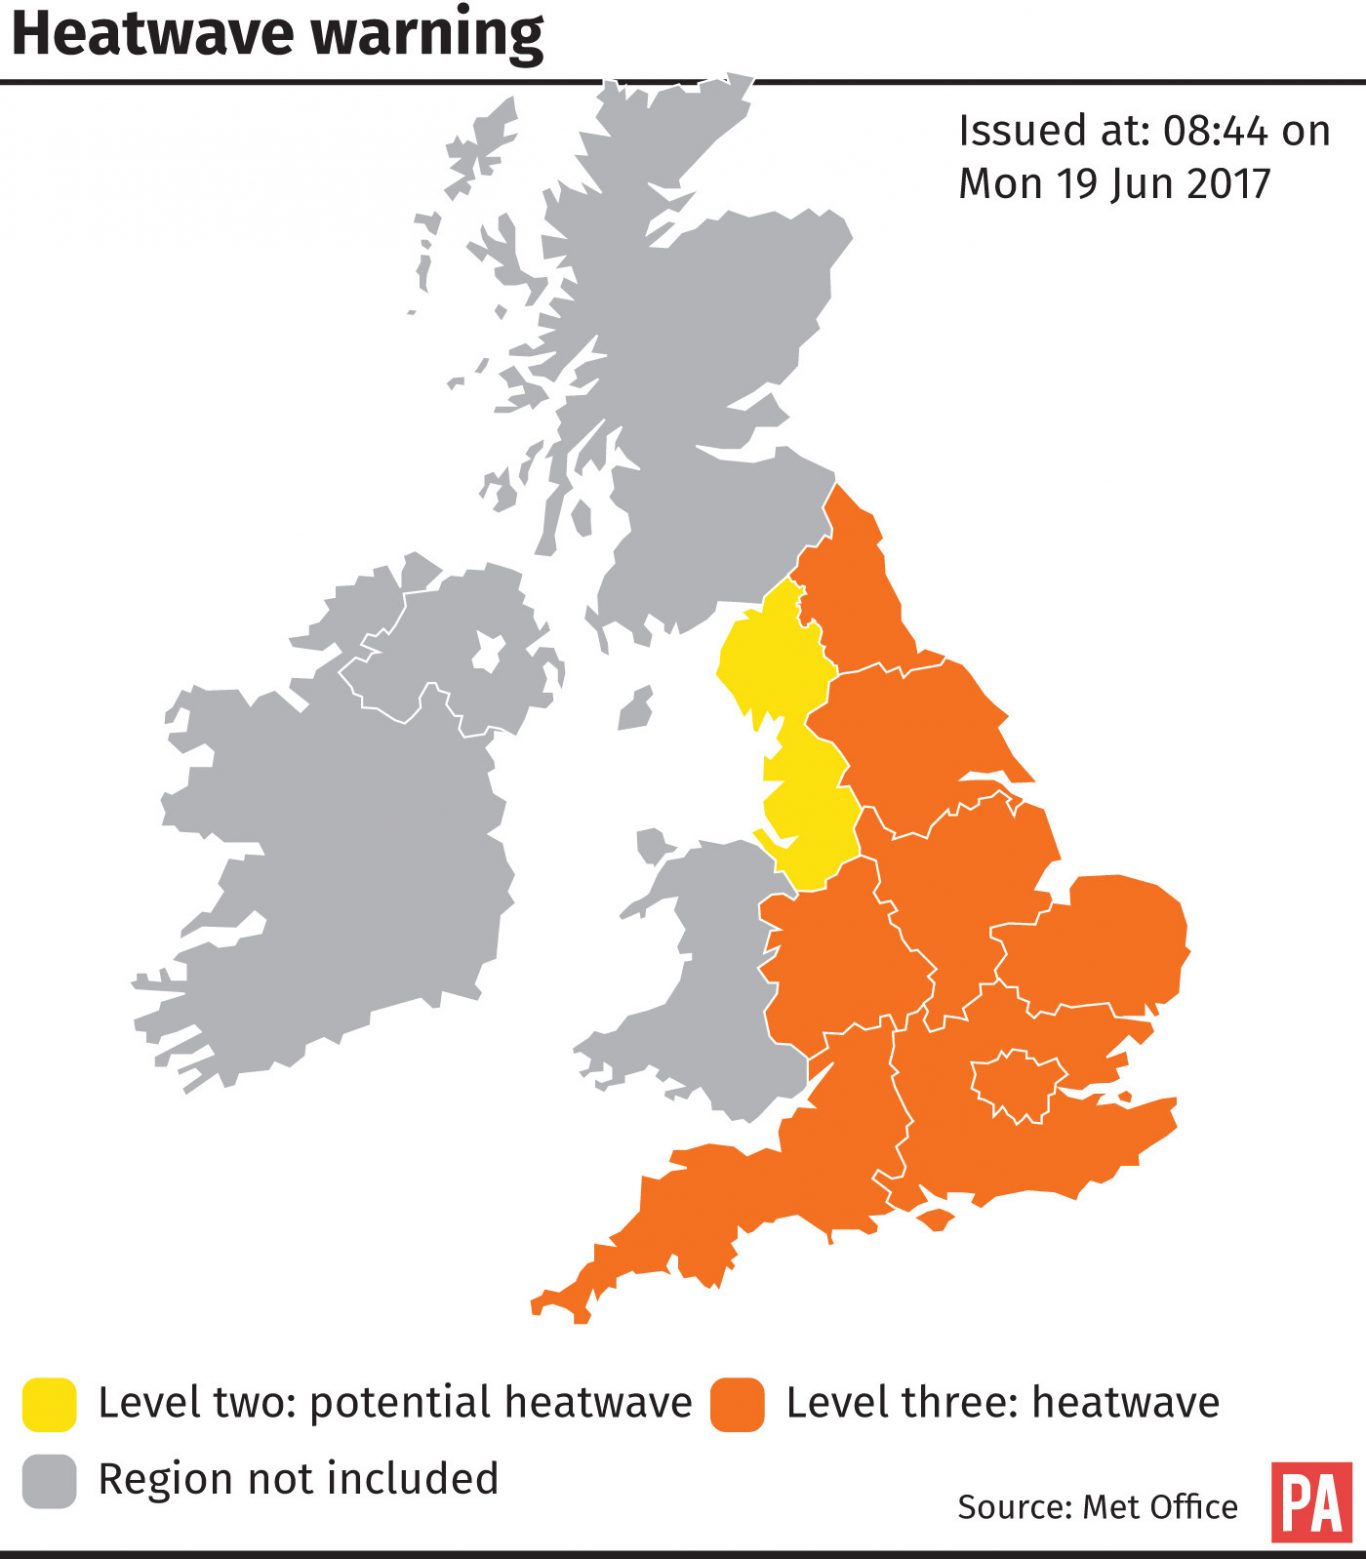 Graphic maps the level three heatwave warning issued by the Met Office.